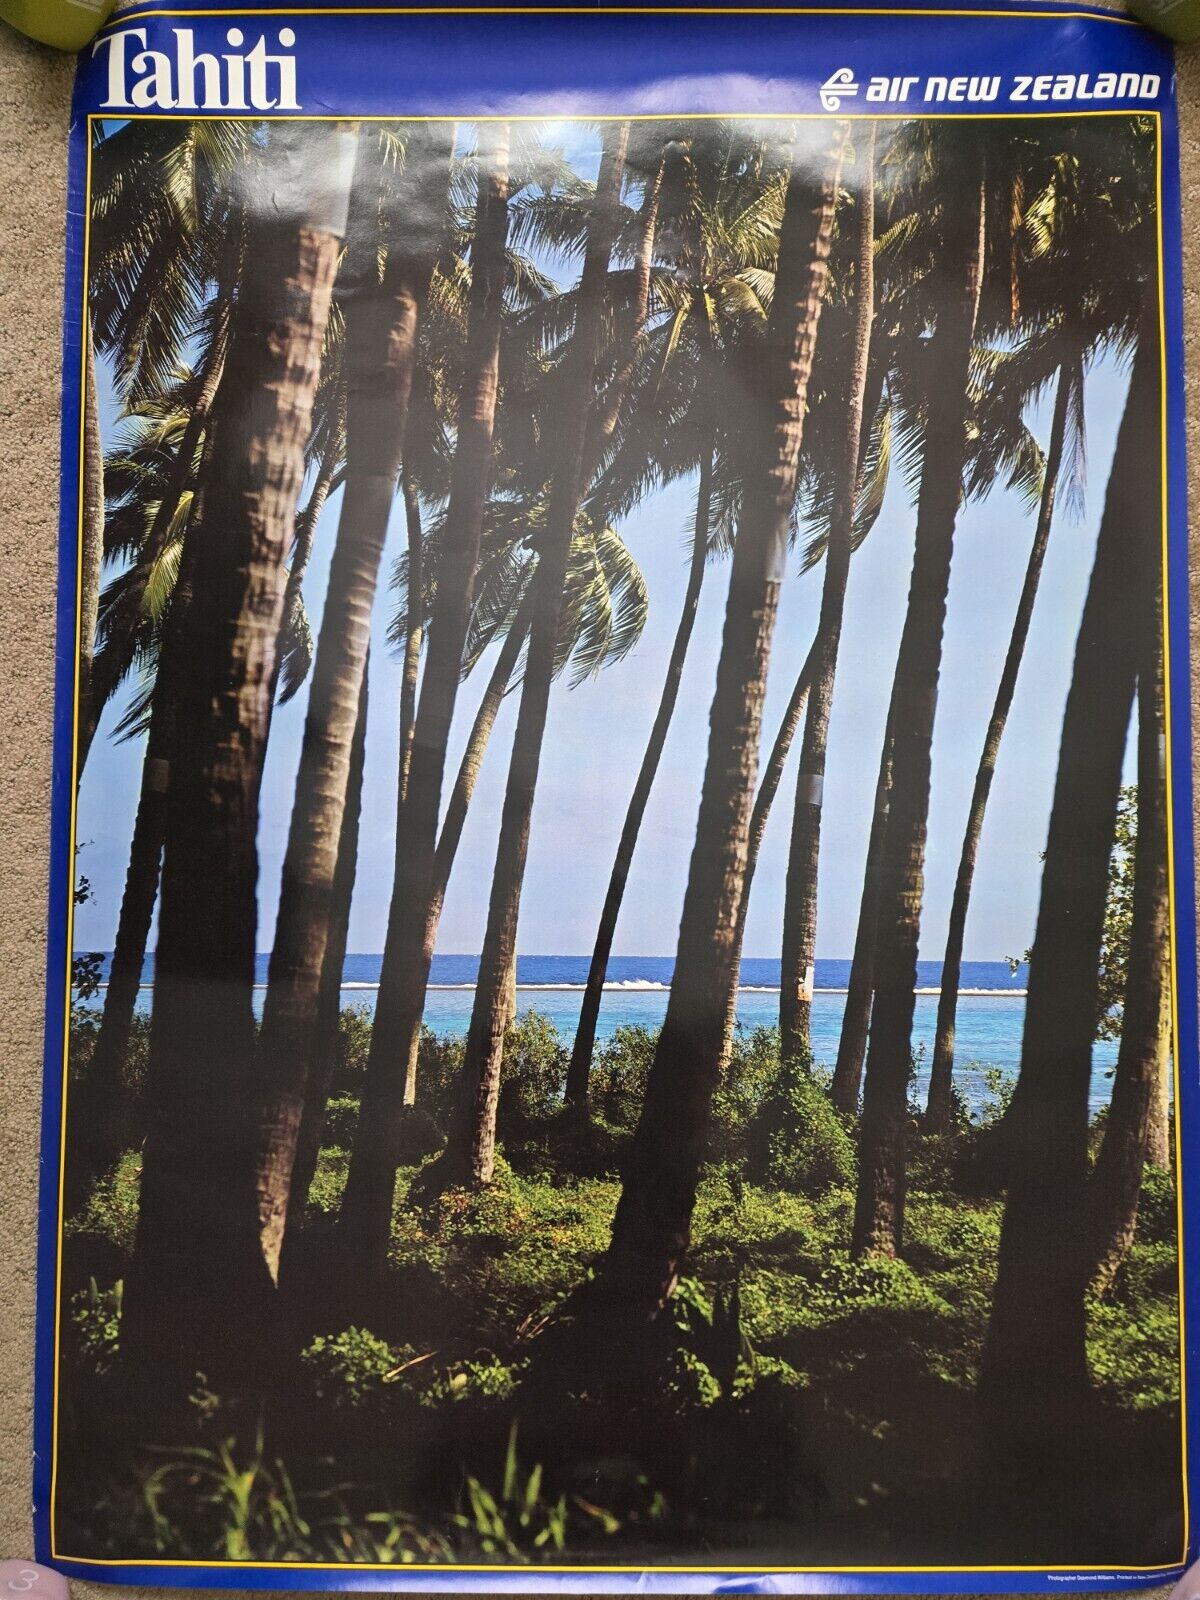 Air New Zealand Airline Promo Poster Tahiti Beach 1980s Vintage 36x26 